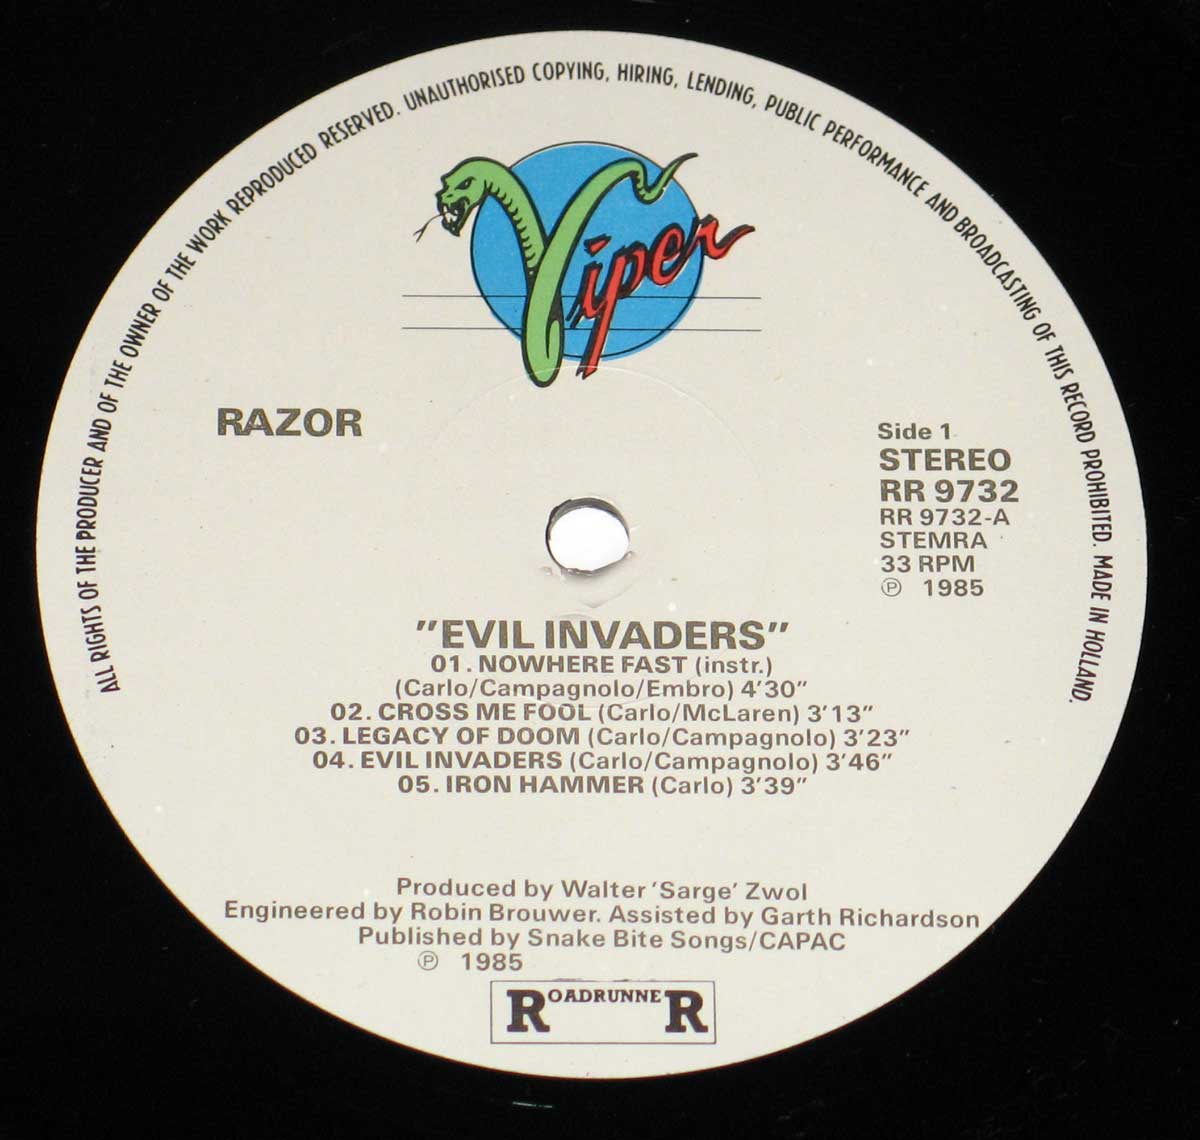 Enlarged High Resolution Photo of the Record's label RAZOR - Evil Invaders https://vinyl-records.nl